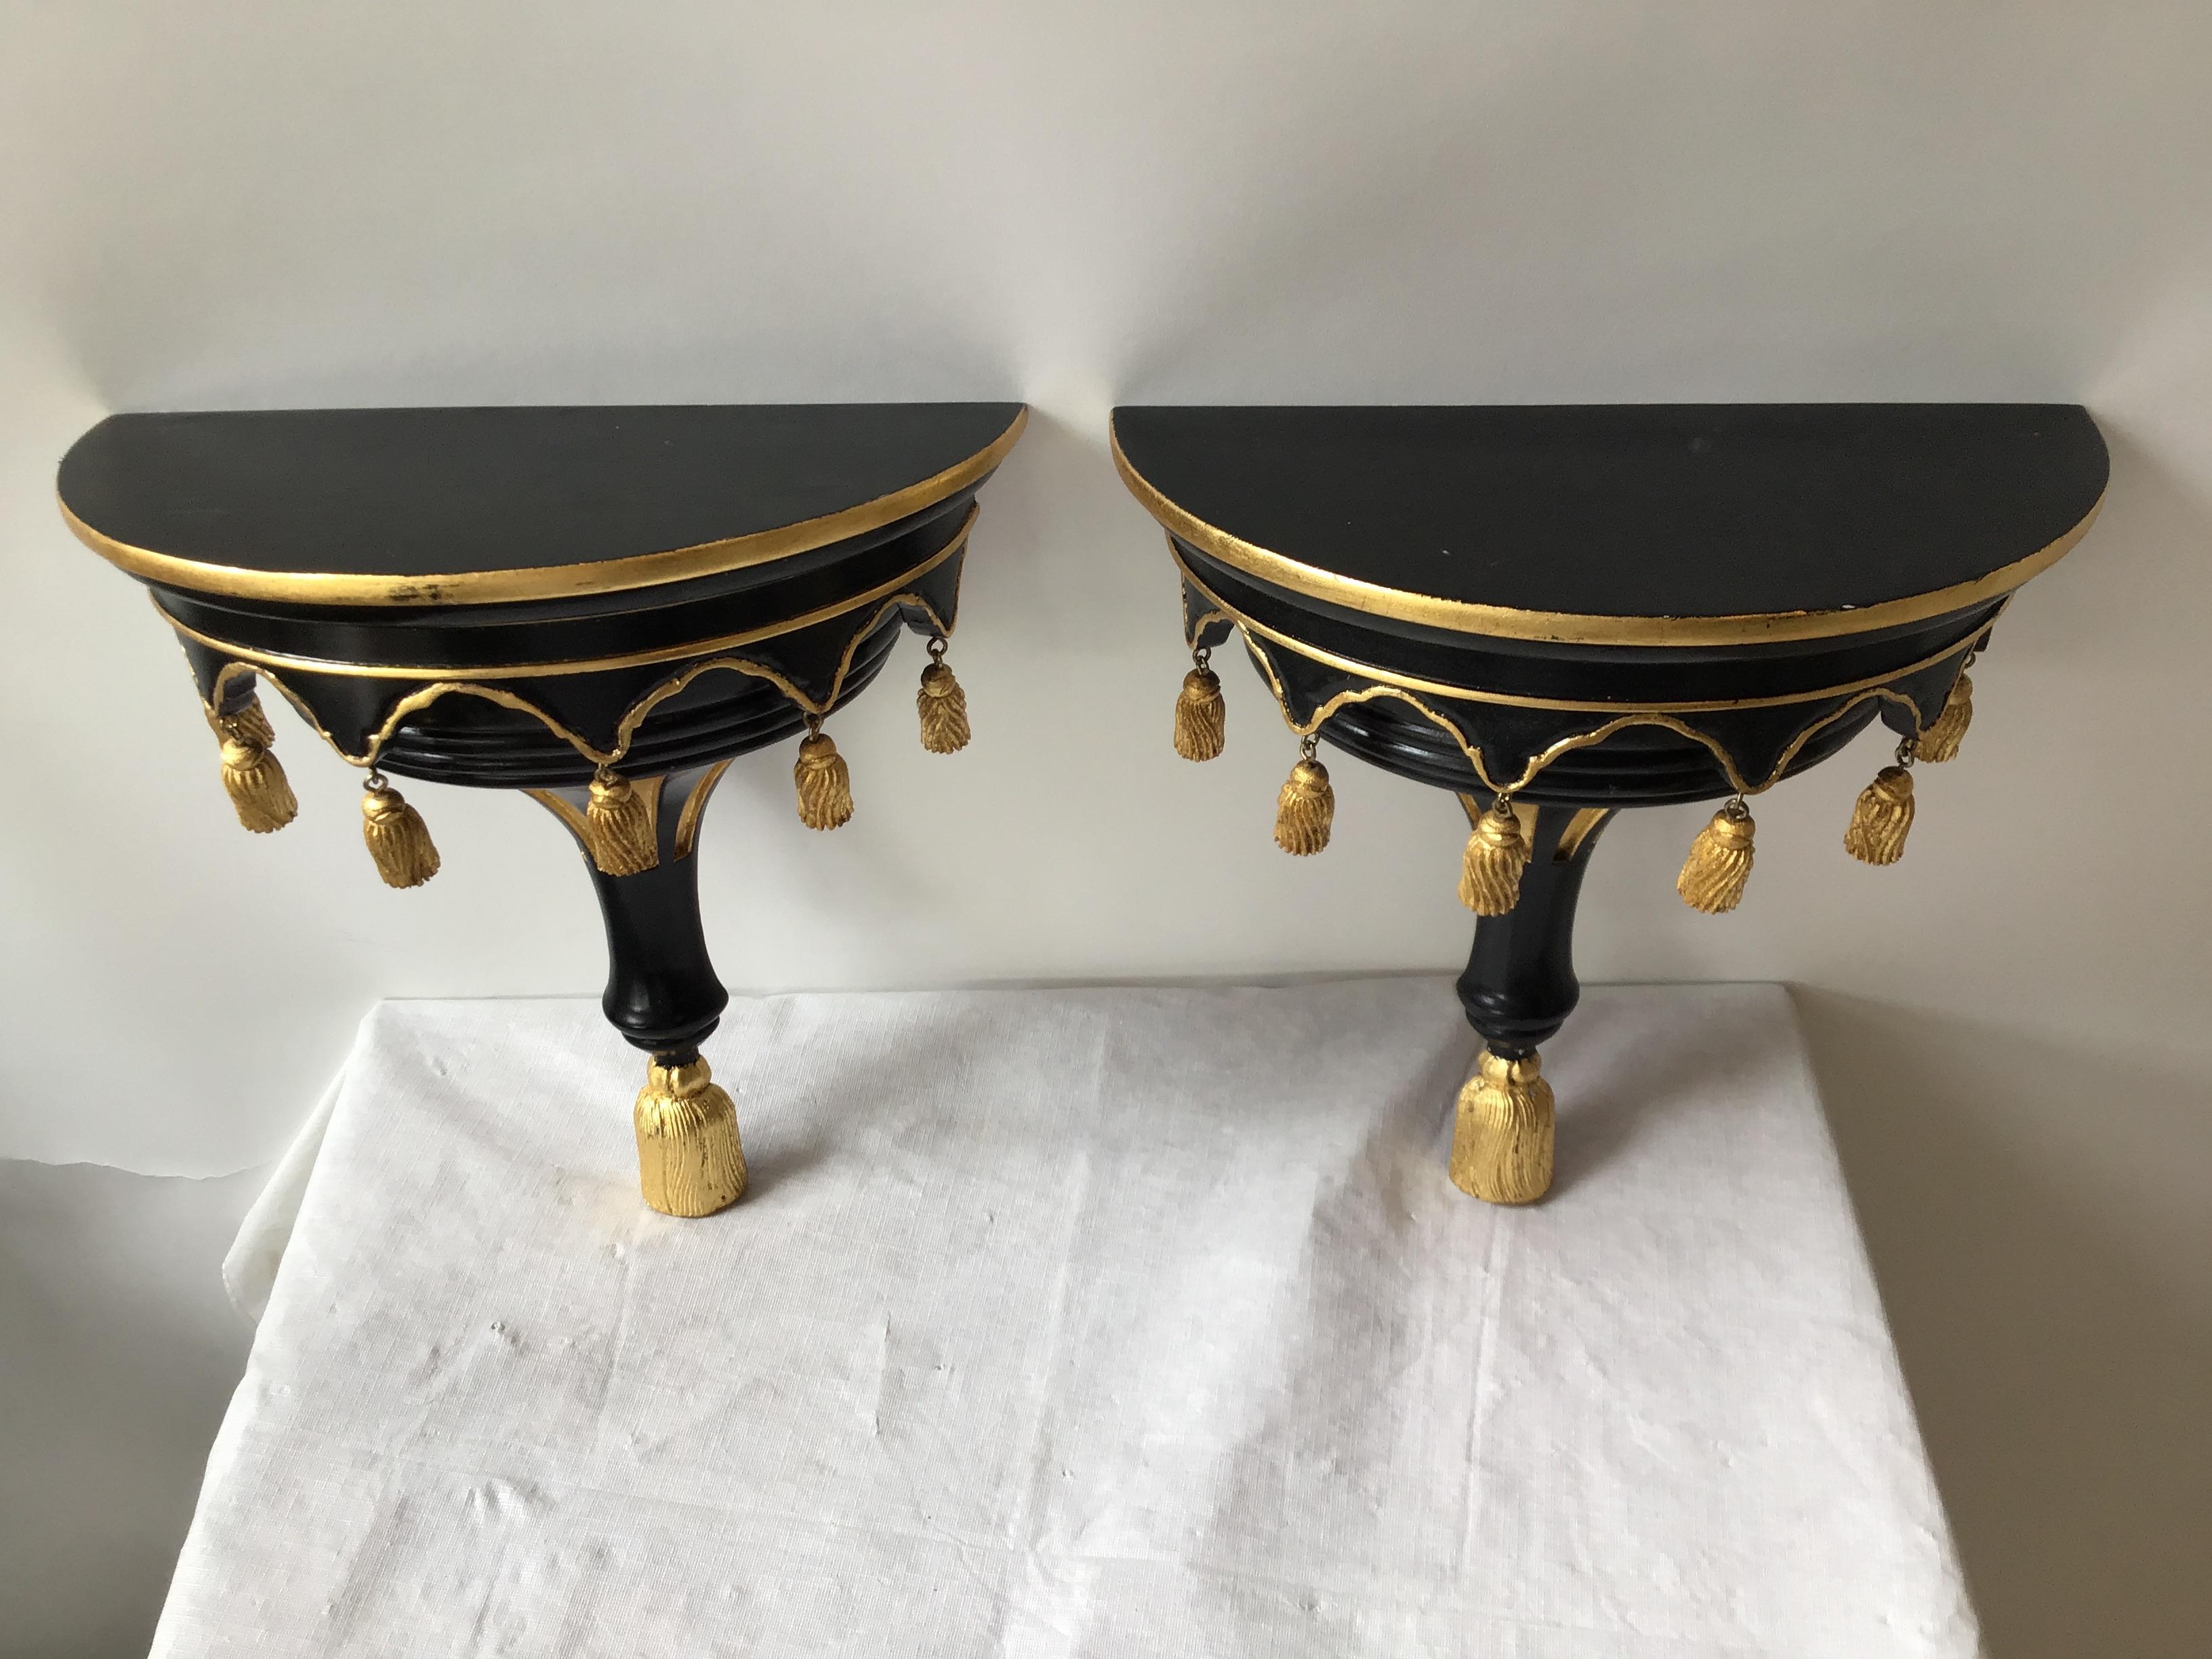 Pair of solid wood wall shelves with gilt tassels.